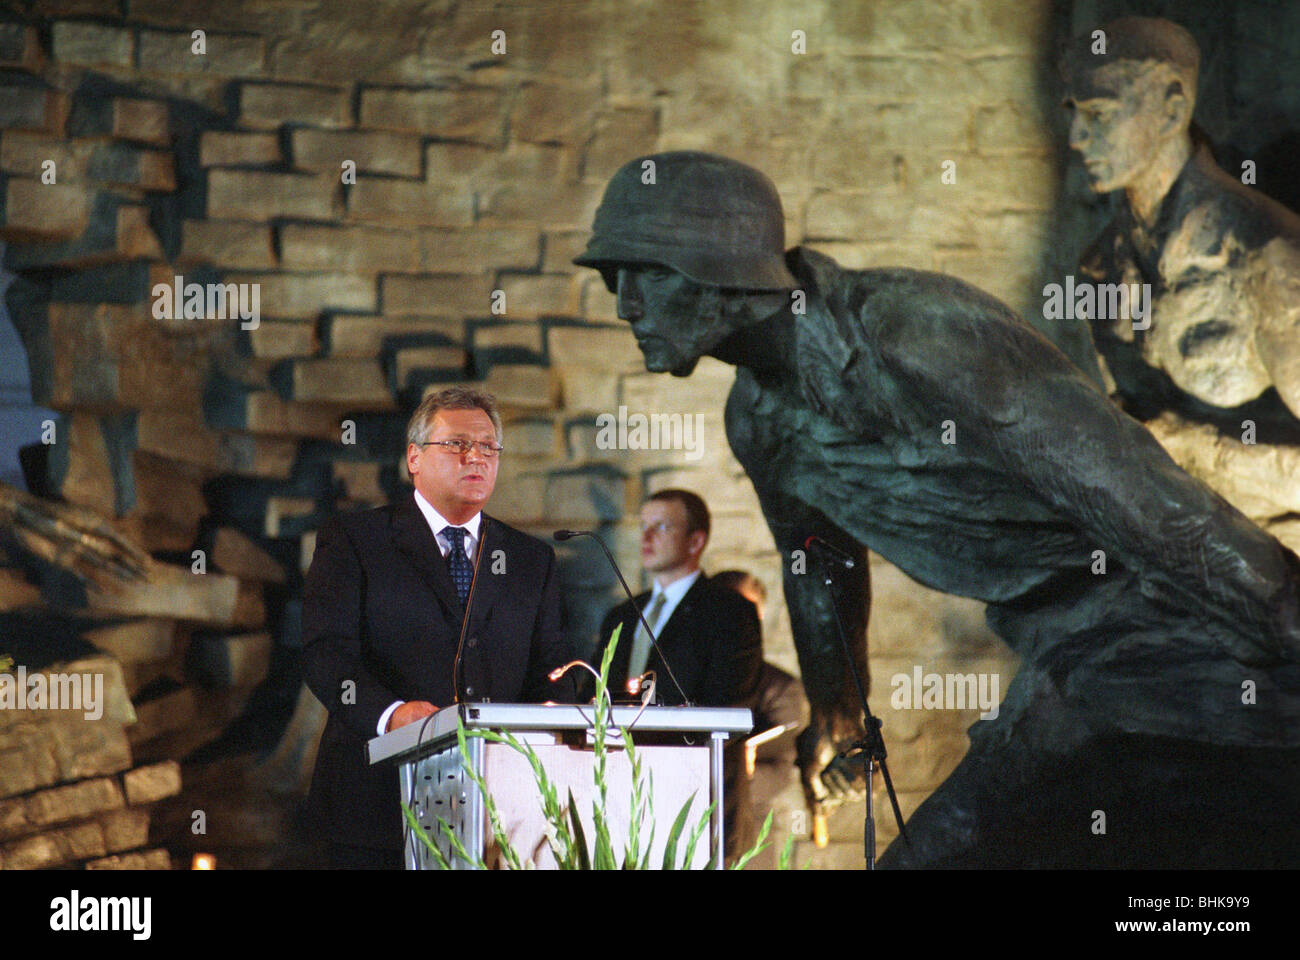 Aleksander Kwasniewski giving a speech during the 60th Anniversary of the Warsaw Uprising, Warsaw, Poland Stock Photo